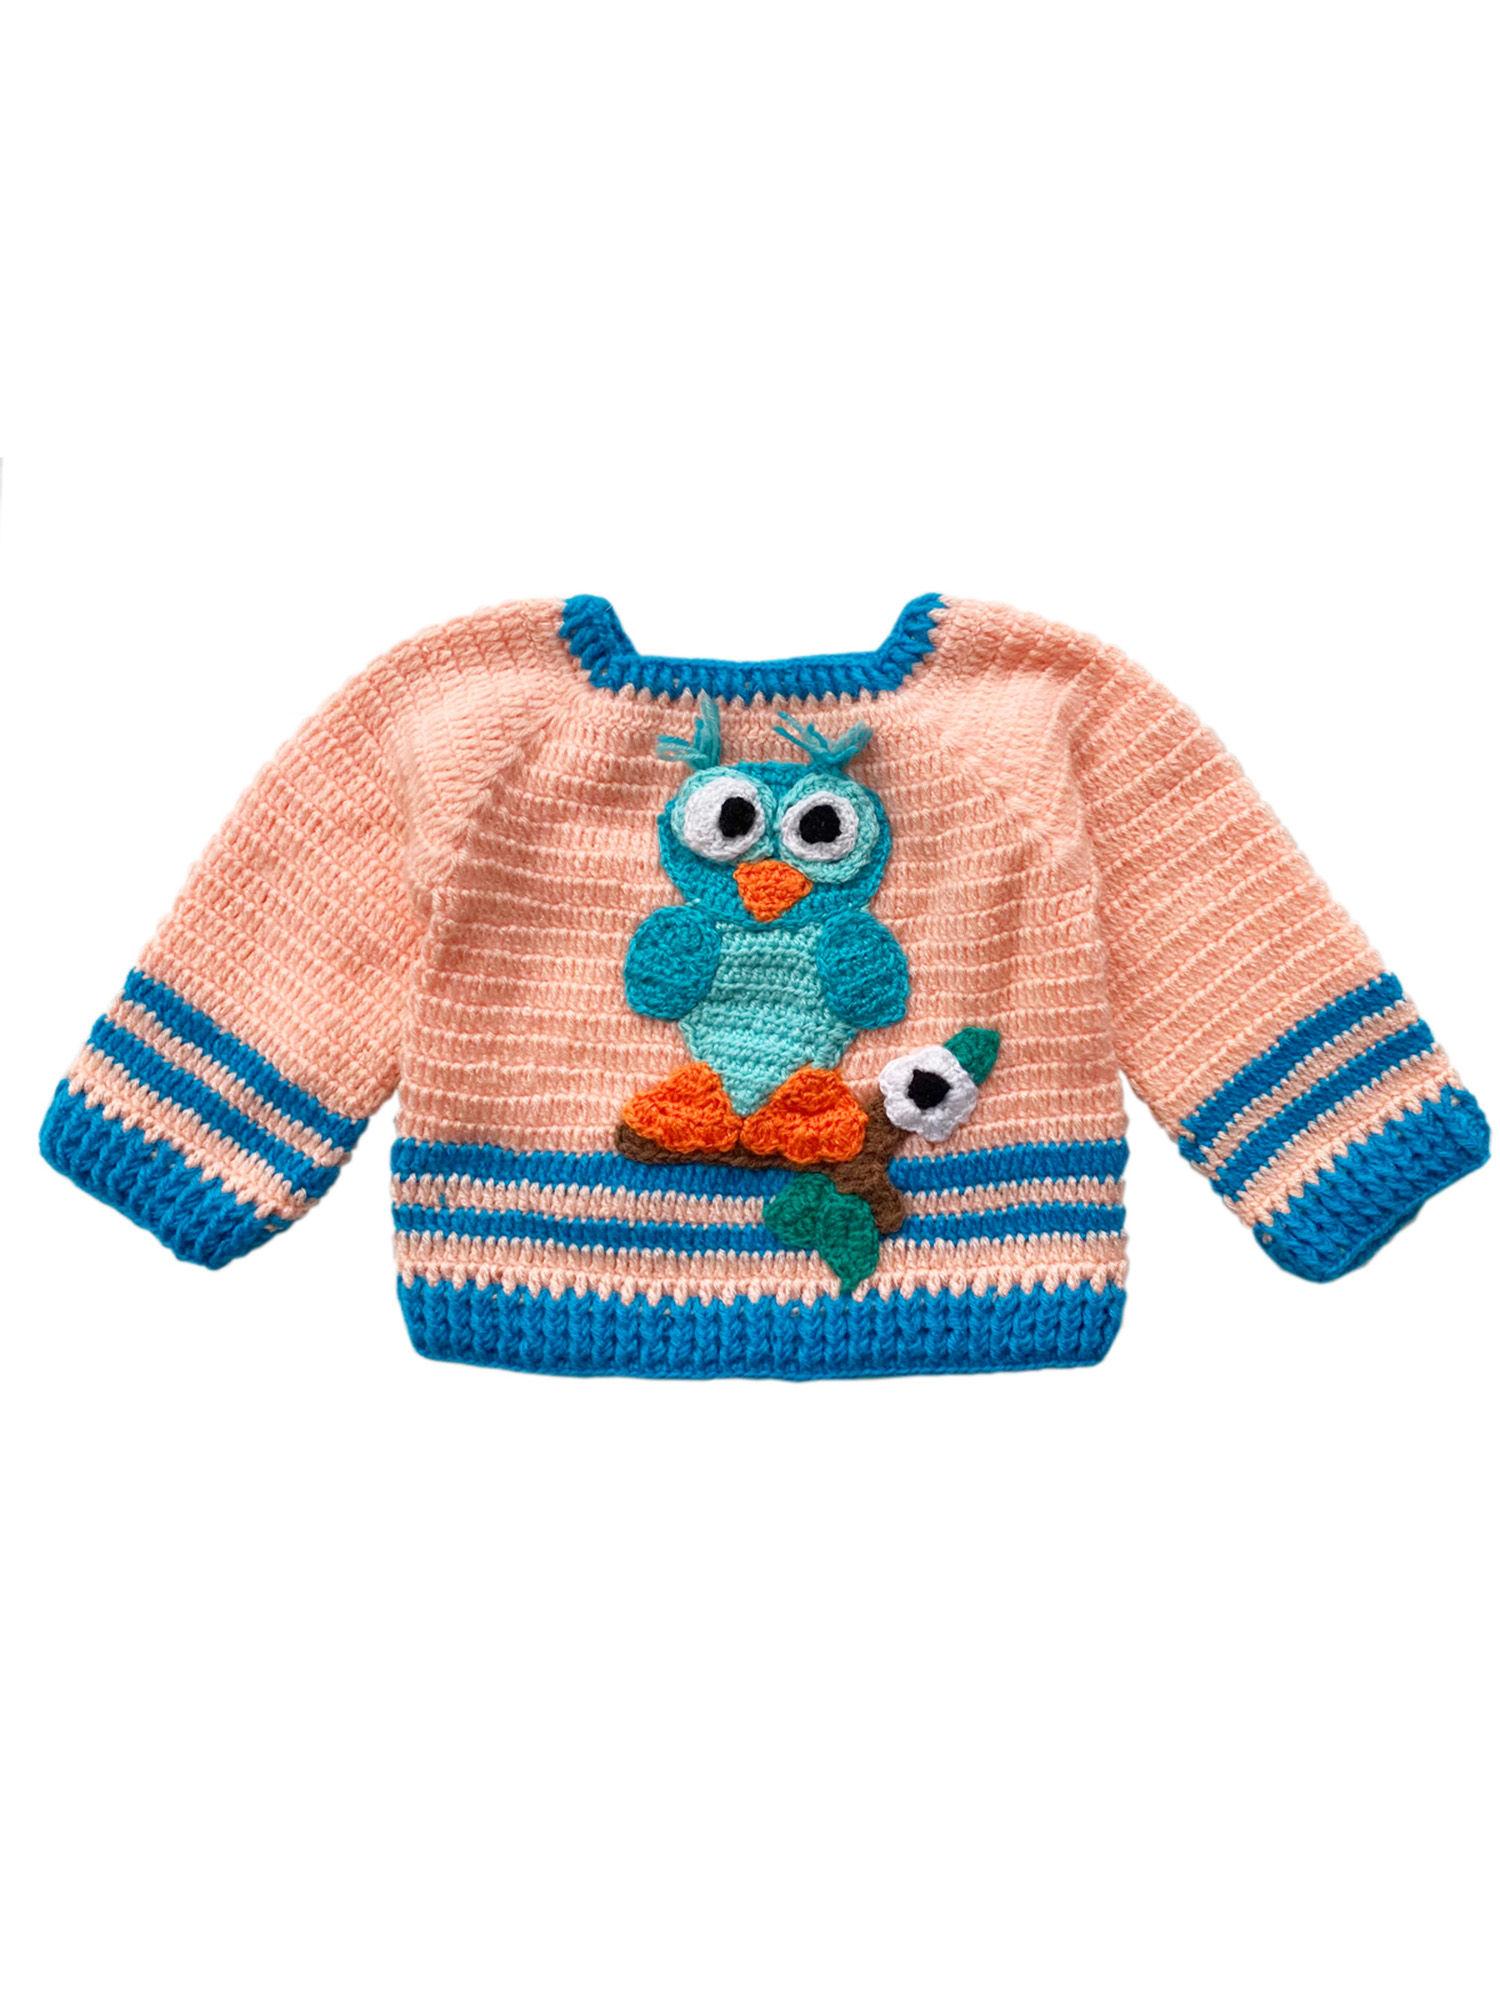 owl applique hand knit sweater